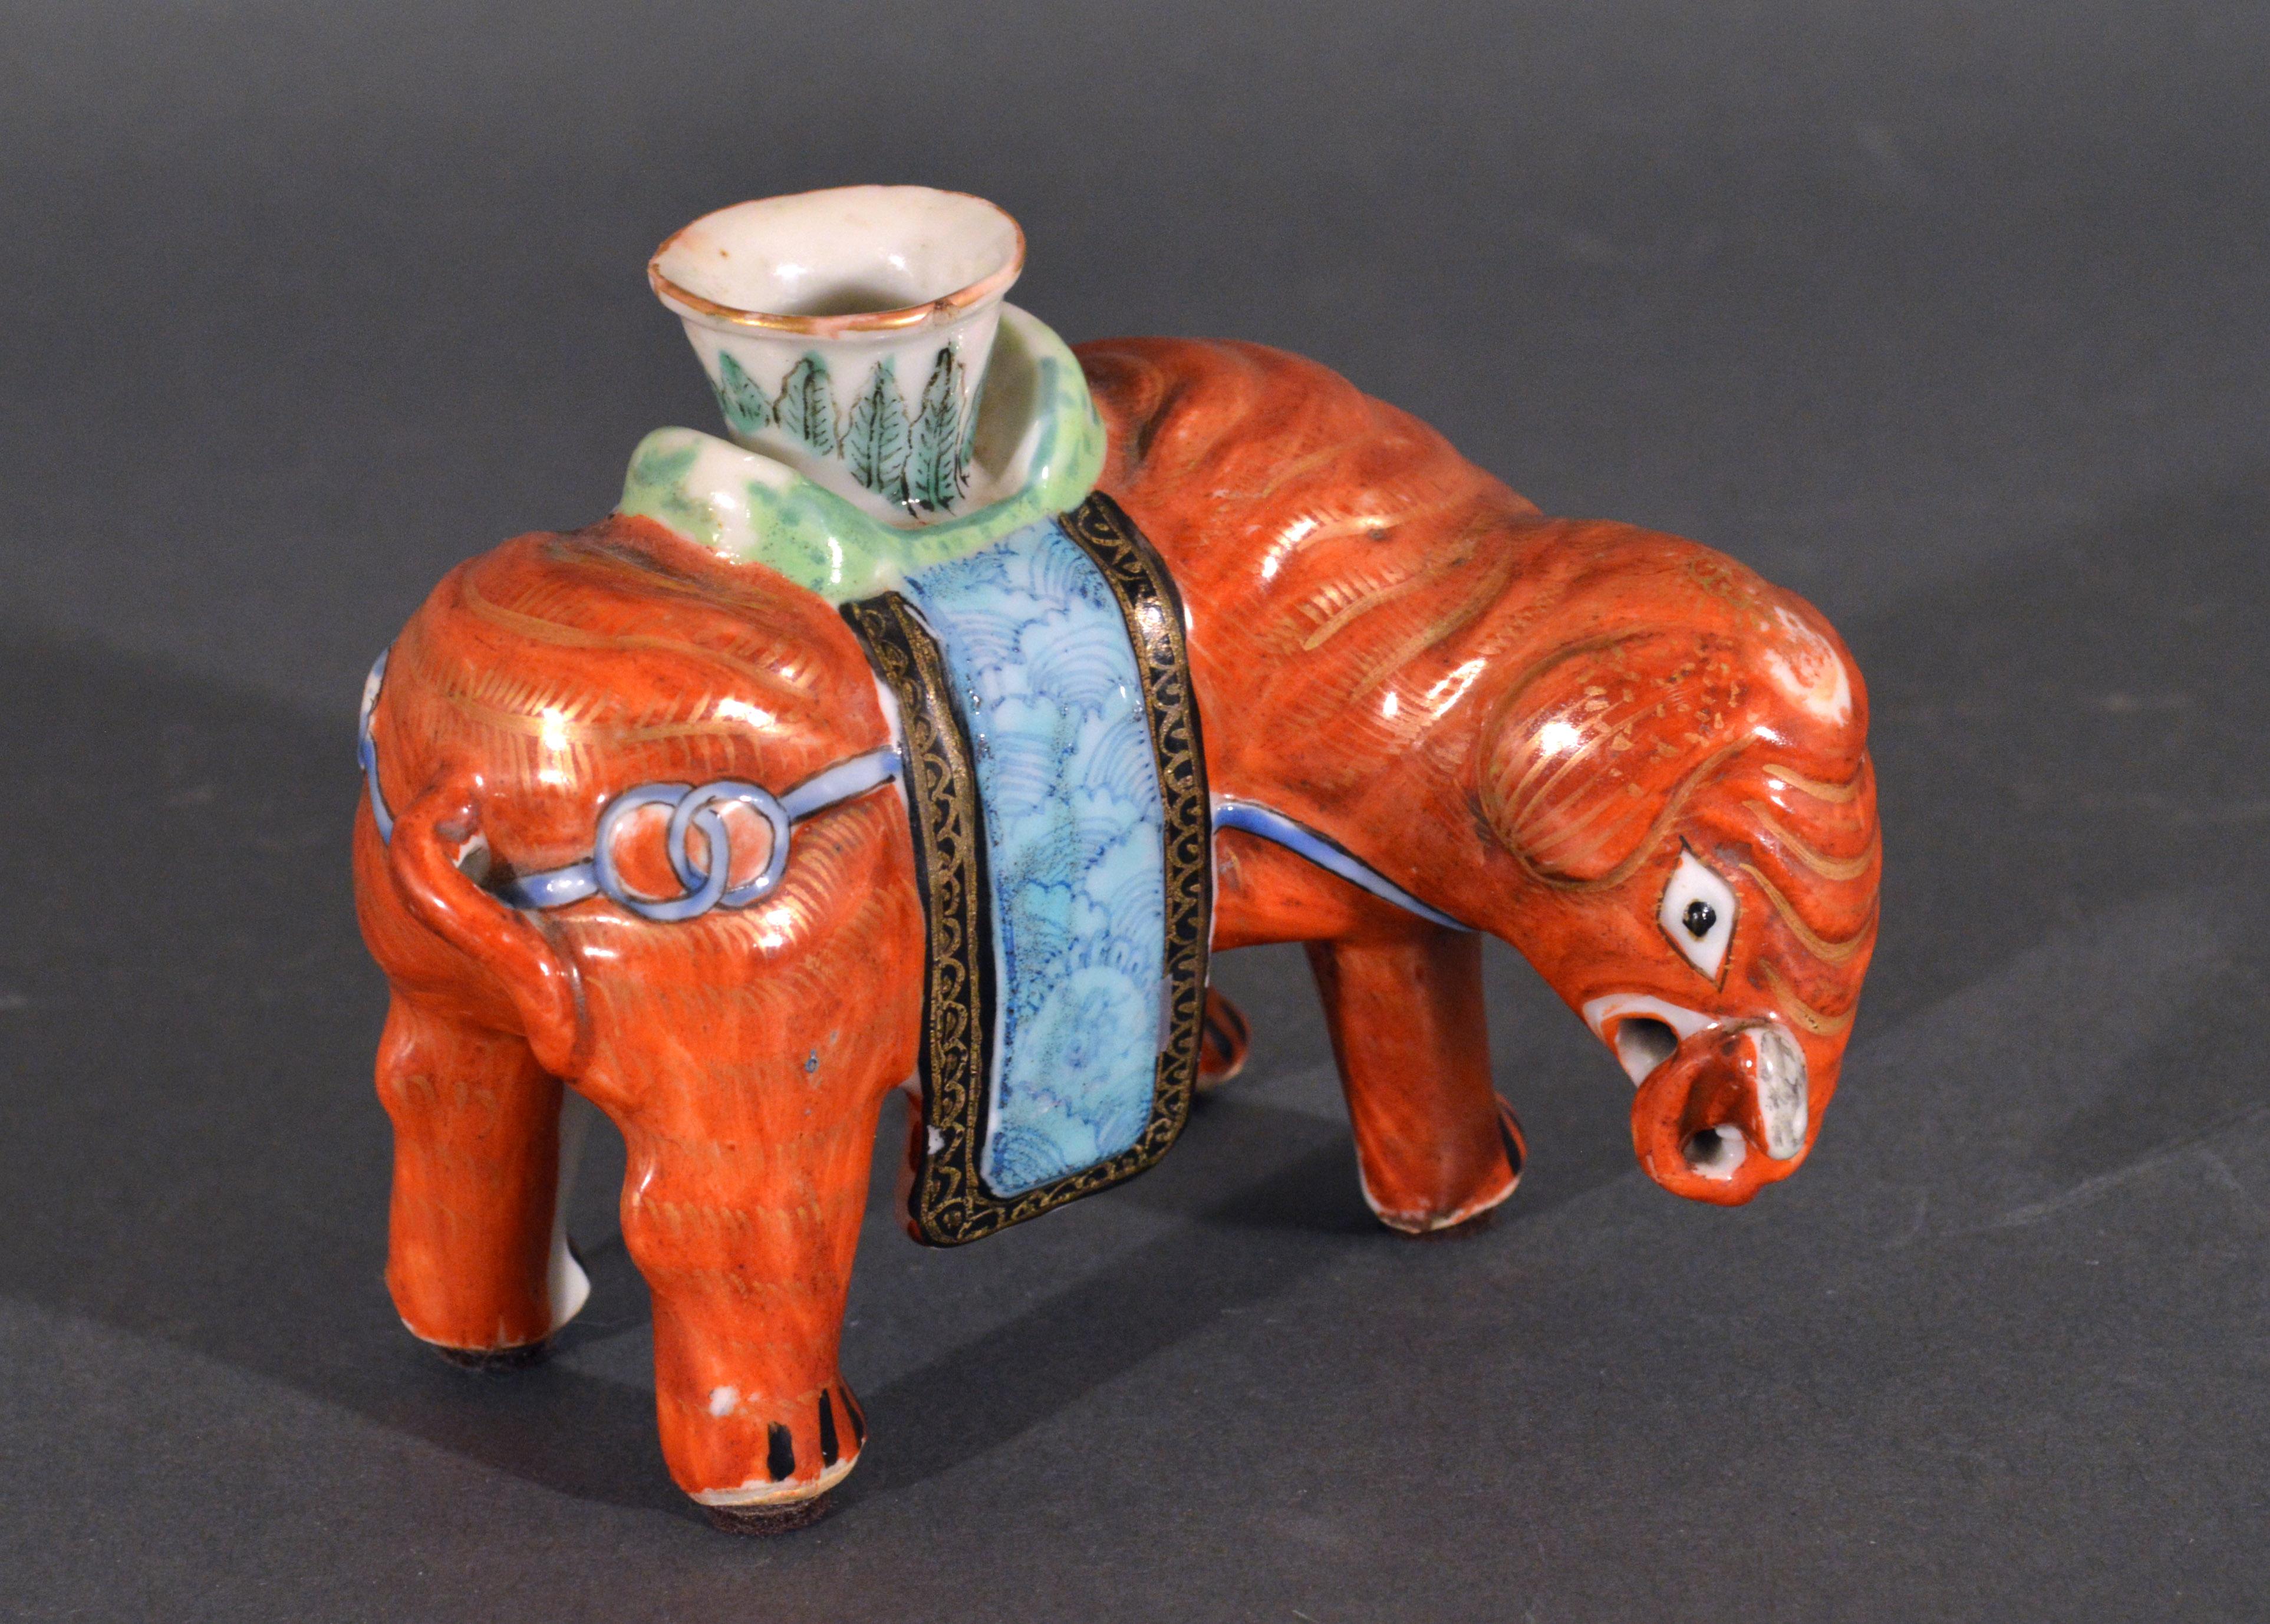 Chinese Export Porcelain small canton famille rose elephant modeled as a candlestick,
circa 1860 

The standing Chinese Export porcelain elephant with its trunk up is painted in an iron-red with gilt decoration. On its back is a vase-shaped